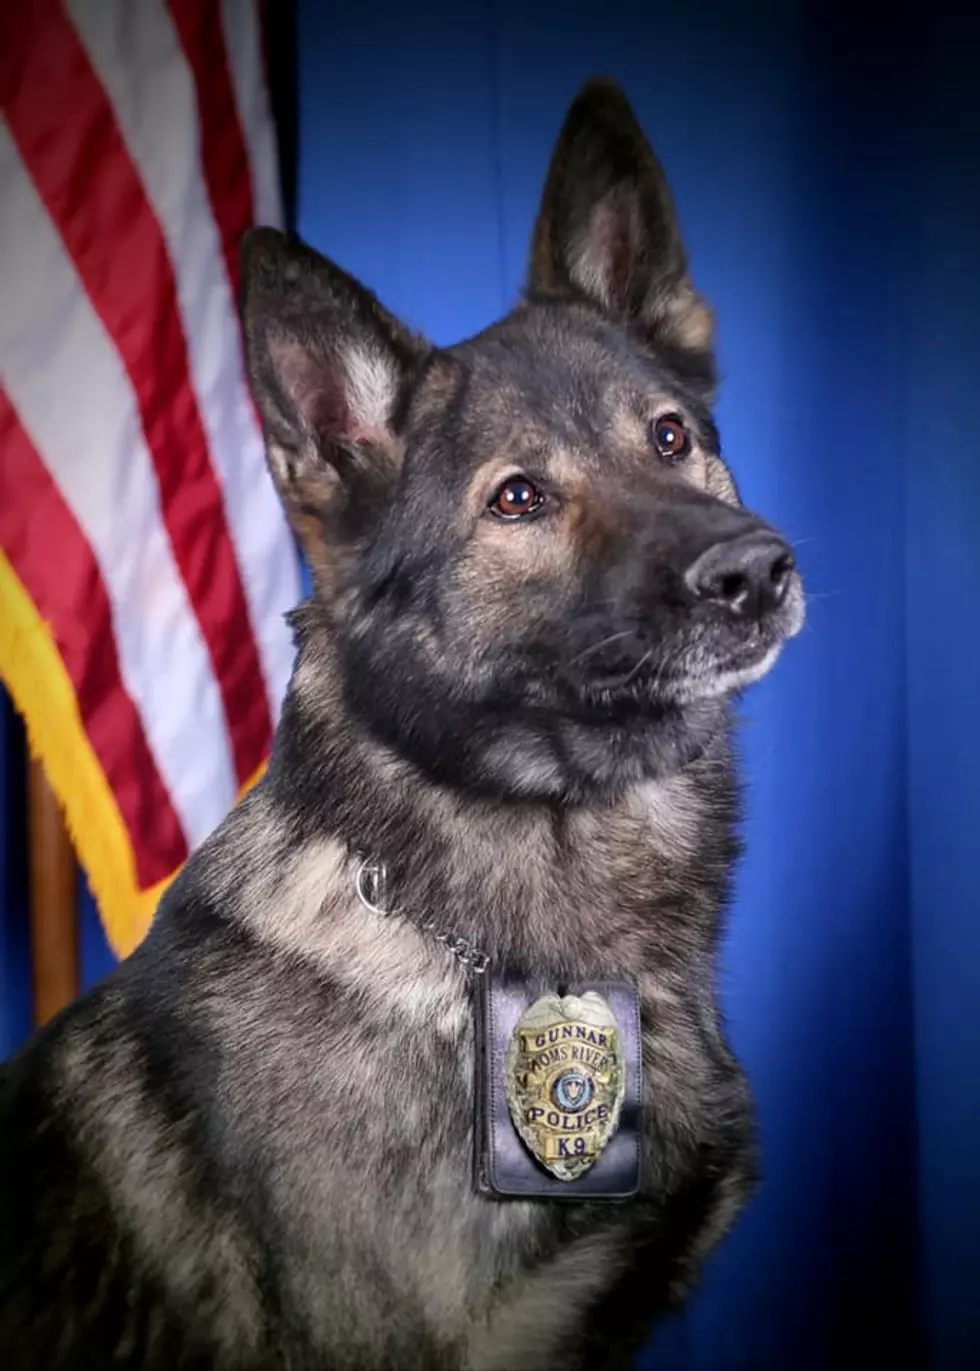 All Dogs Go To K-9 Heaven: Toms River Police K-9 Gunnar passes away